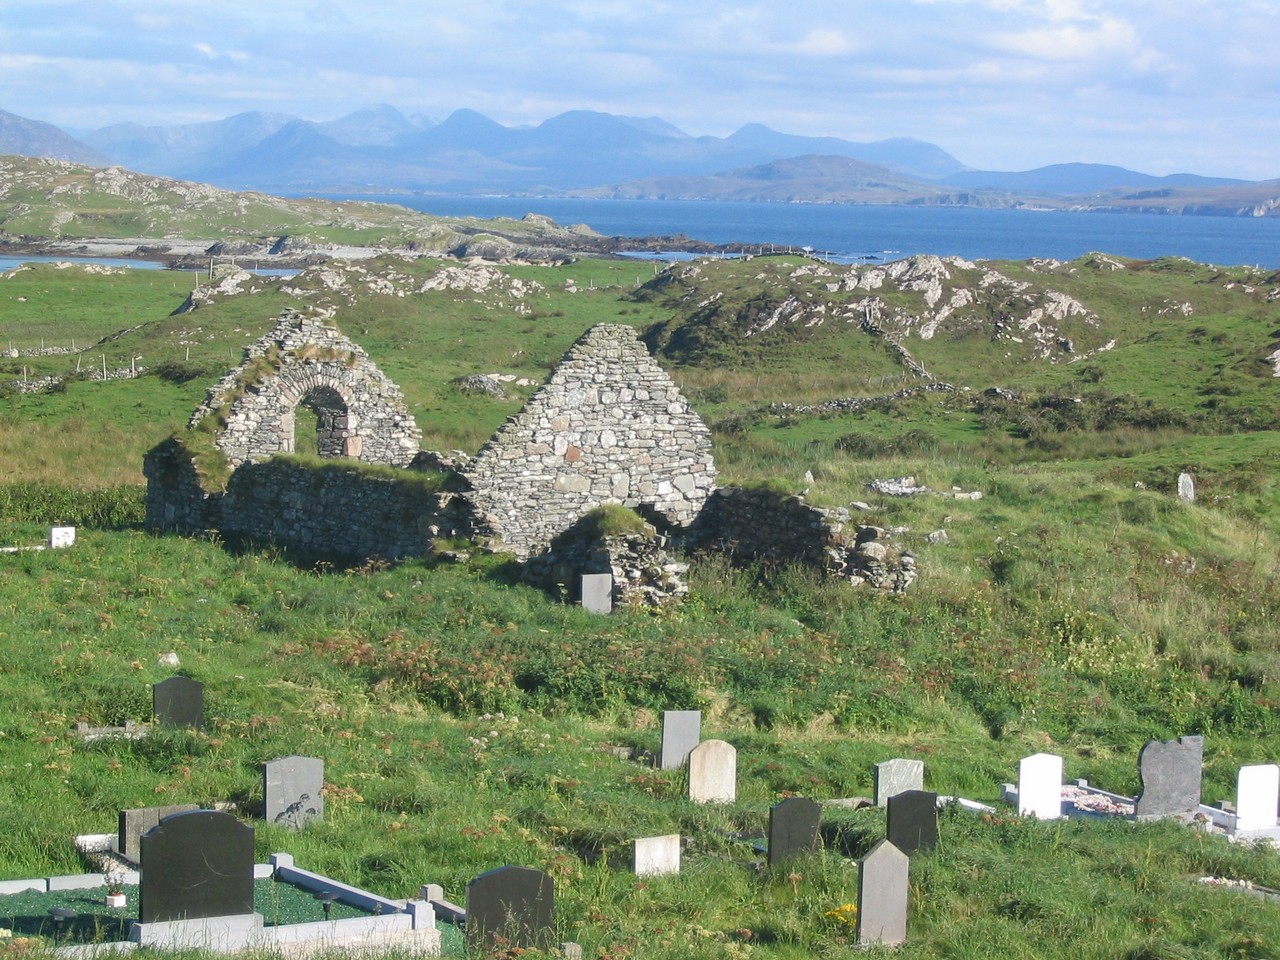 At the sheltered eastern end of the island is the 14th century ruins of St. Colman's church on the site of the monastery founded by the saint in 665. The island graveyard is still located here.